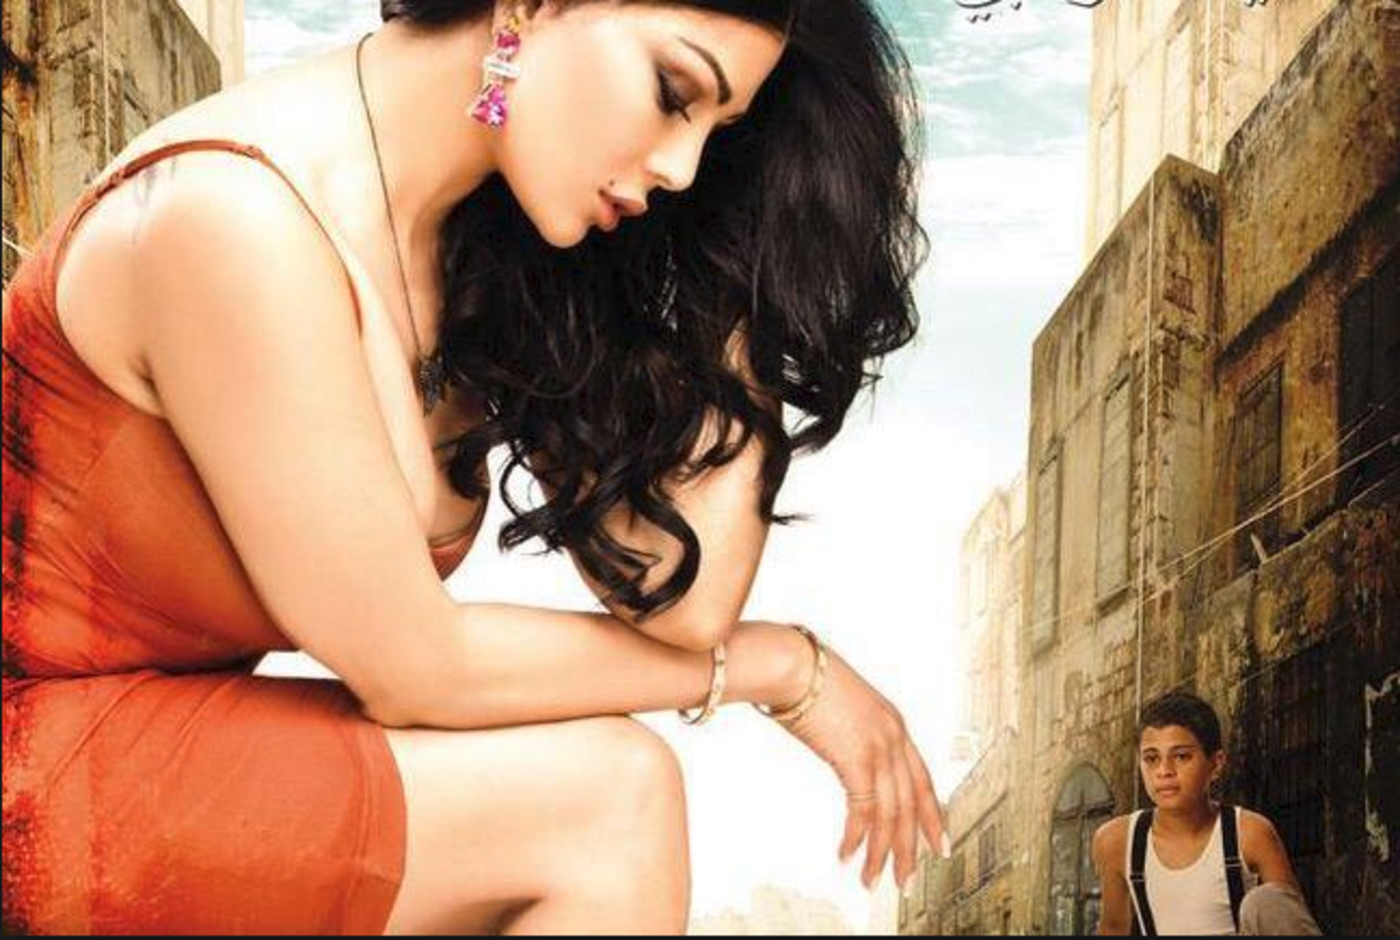 Kajal Sex Videos Come - Lebanese star's movie pulled from Egyptian screens | Middle East Eye